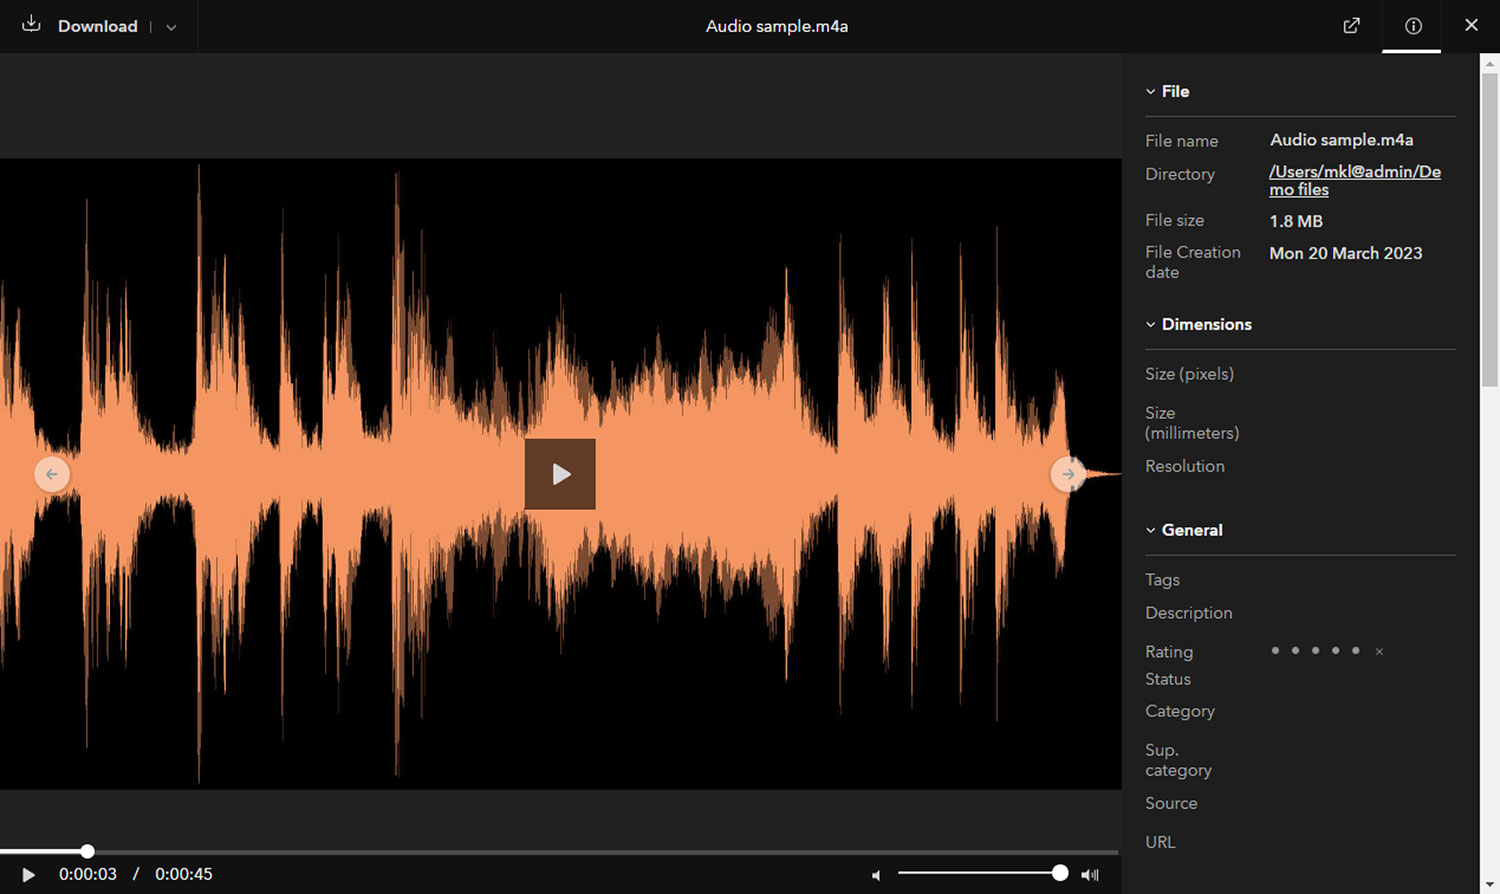 Previewing an audio file